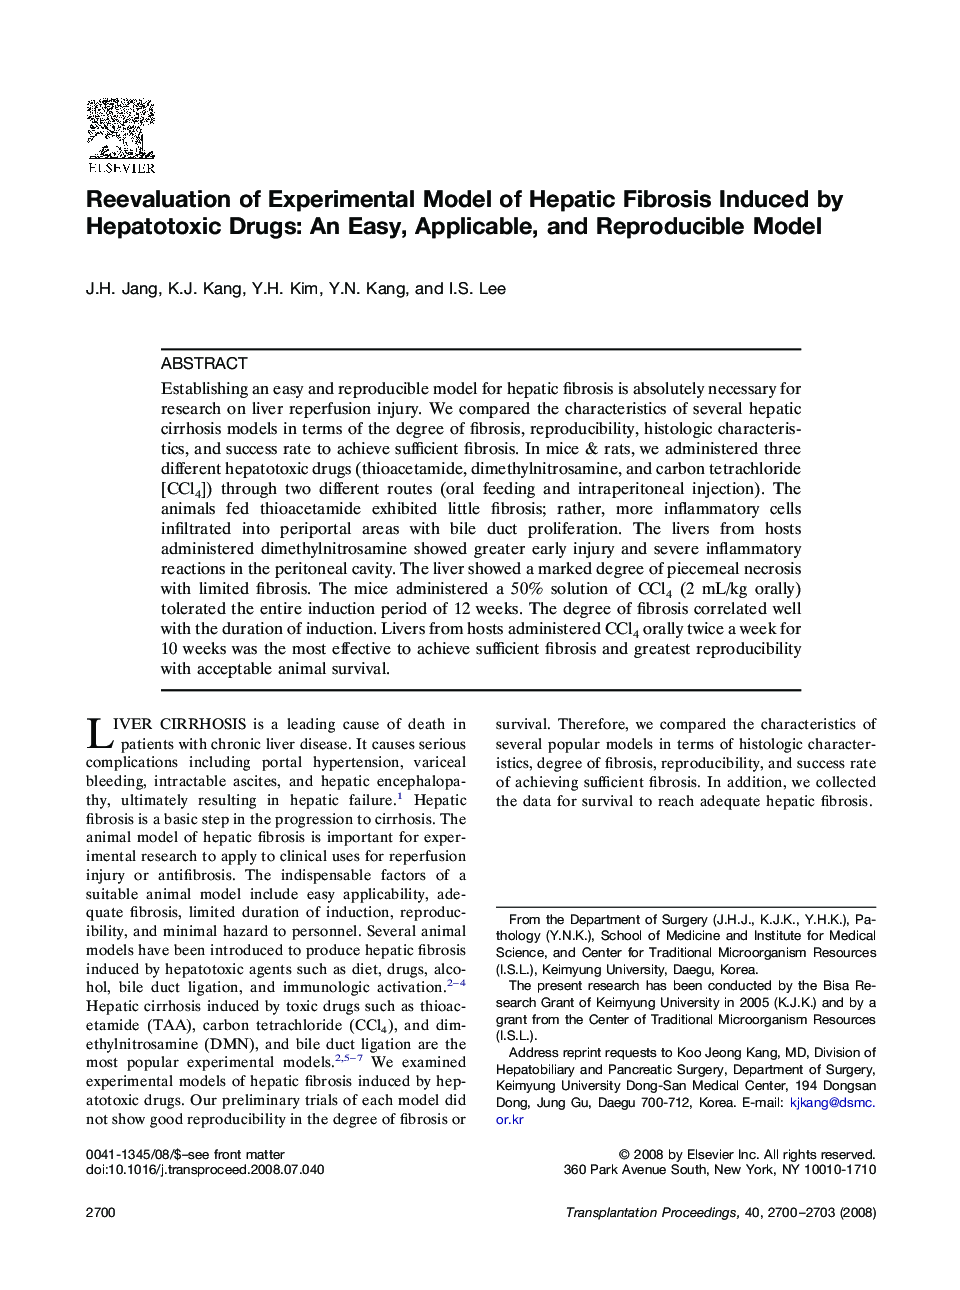 Reevaluation of Experimental Model of Hepatic Fibrosis Induced by Hepatotoxic Drugs: An Easy, Applicable, and Reproducible Model 